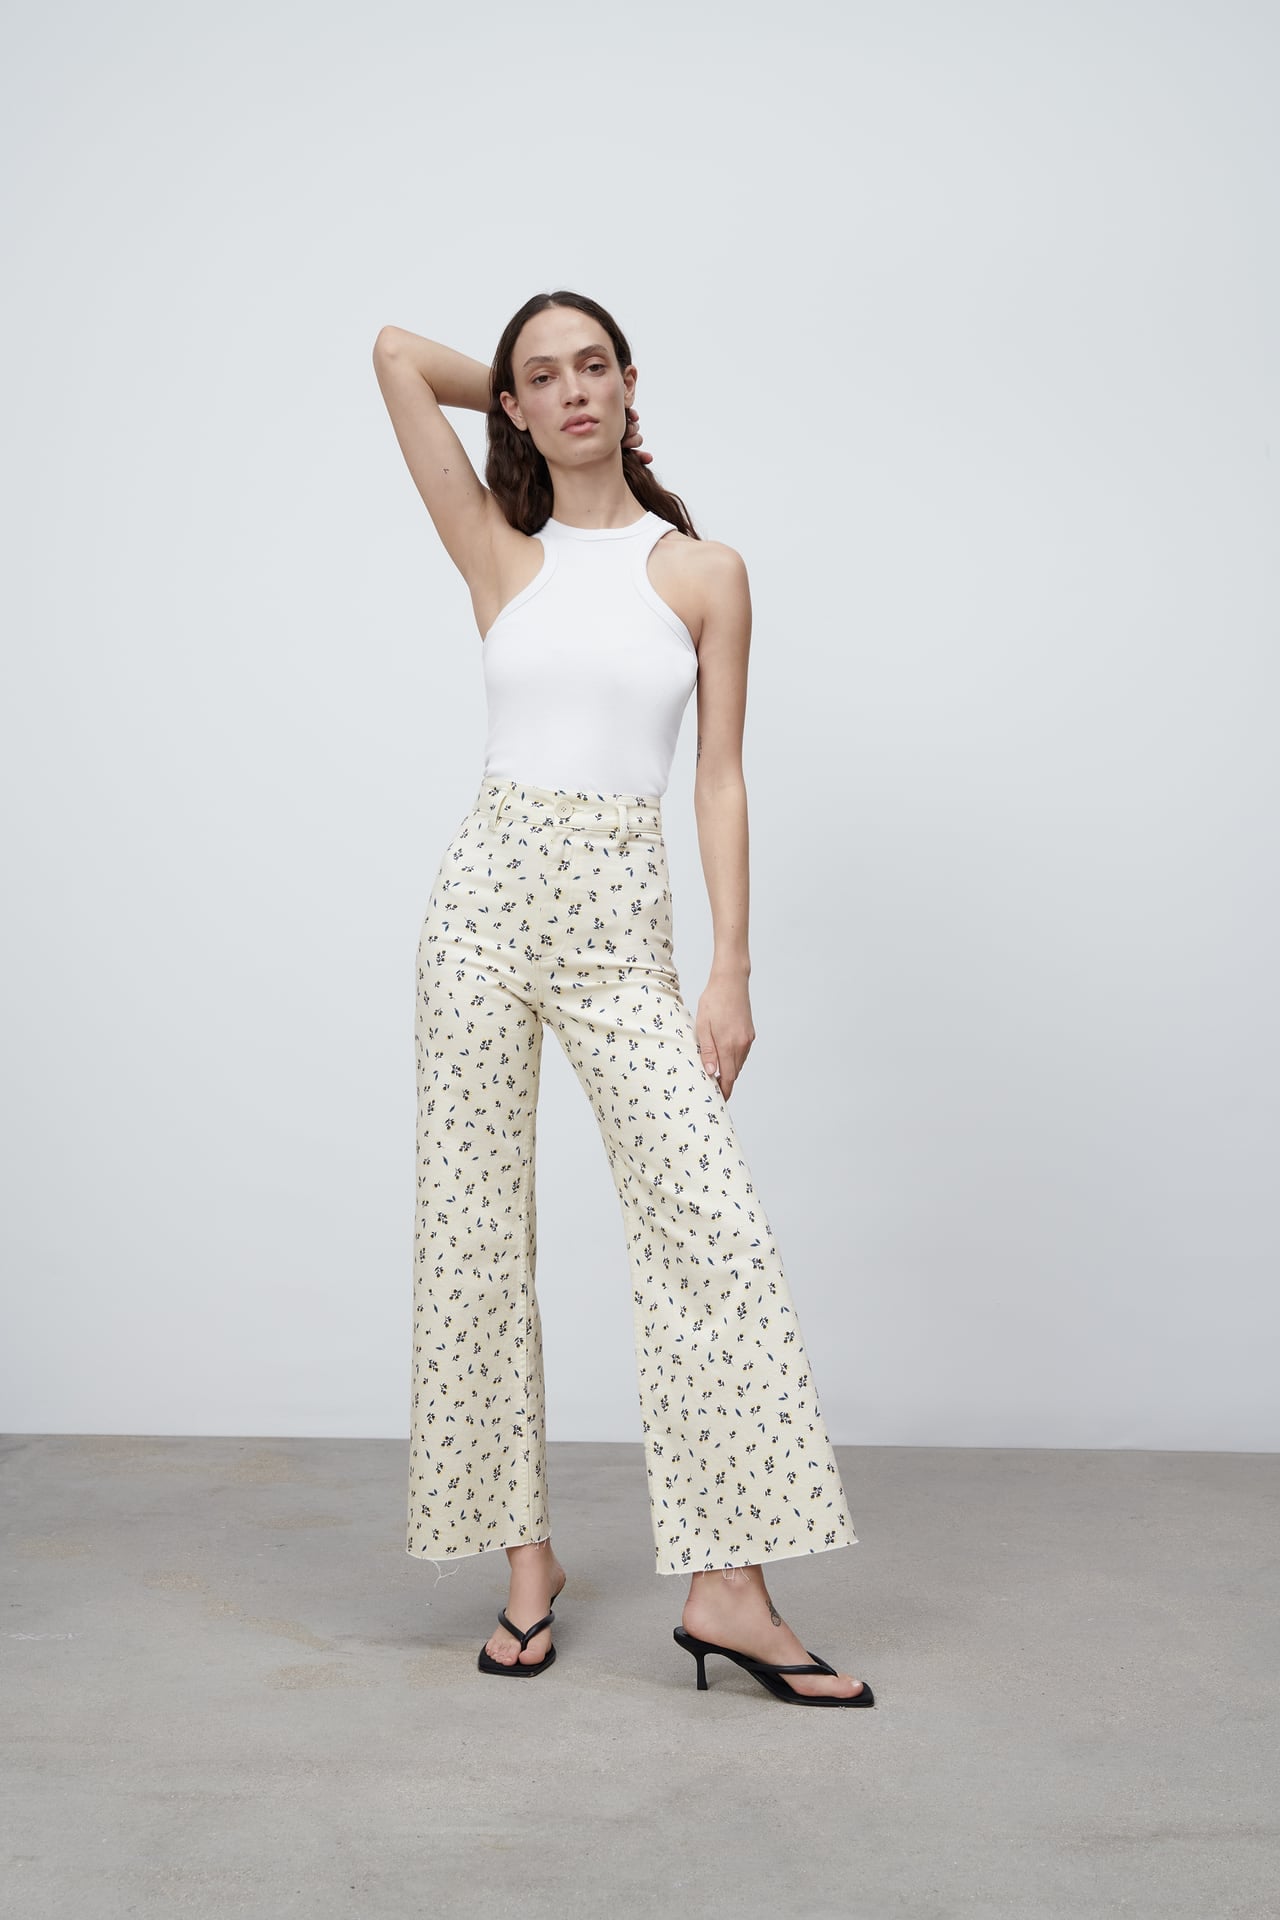 Looking for Cute Spring Clothes at Zara? Here's My Picks - Fly Fierce Fab